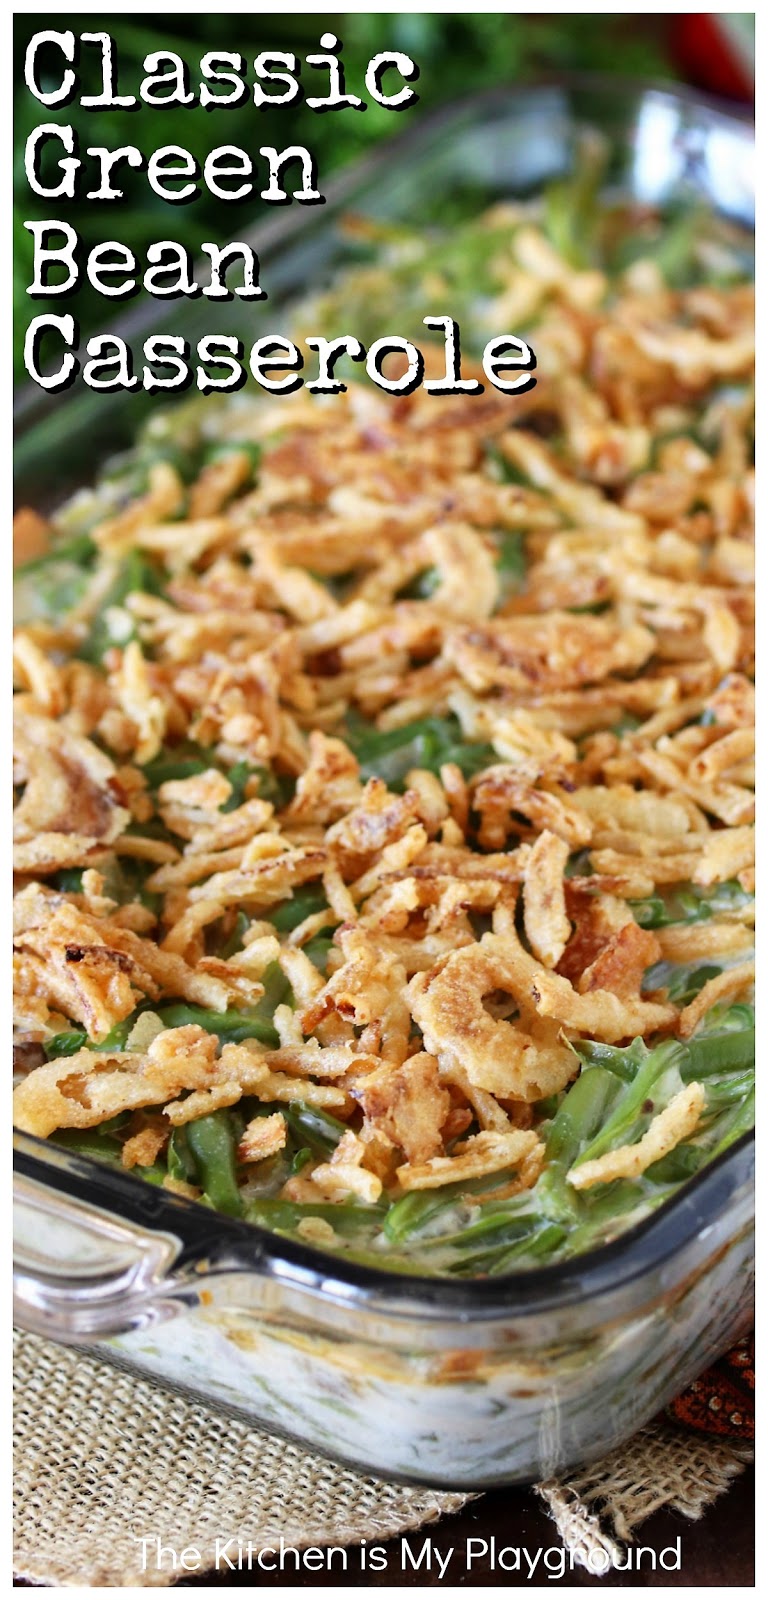 Classic Green Bean Casserole | The Kitchen is My Playground